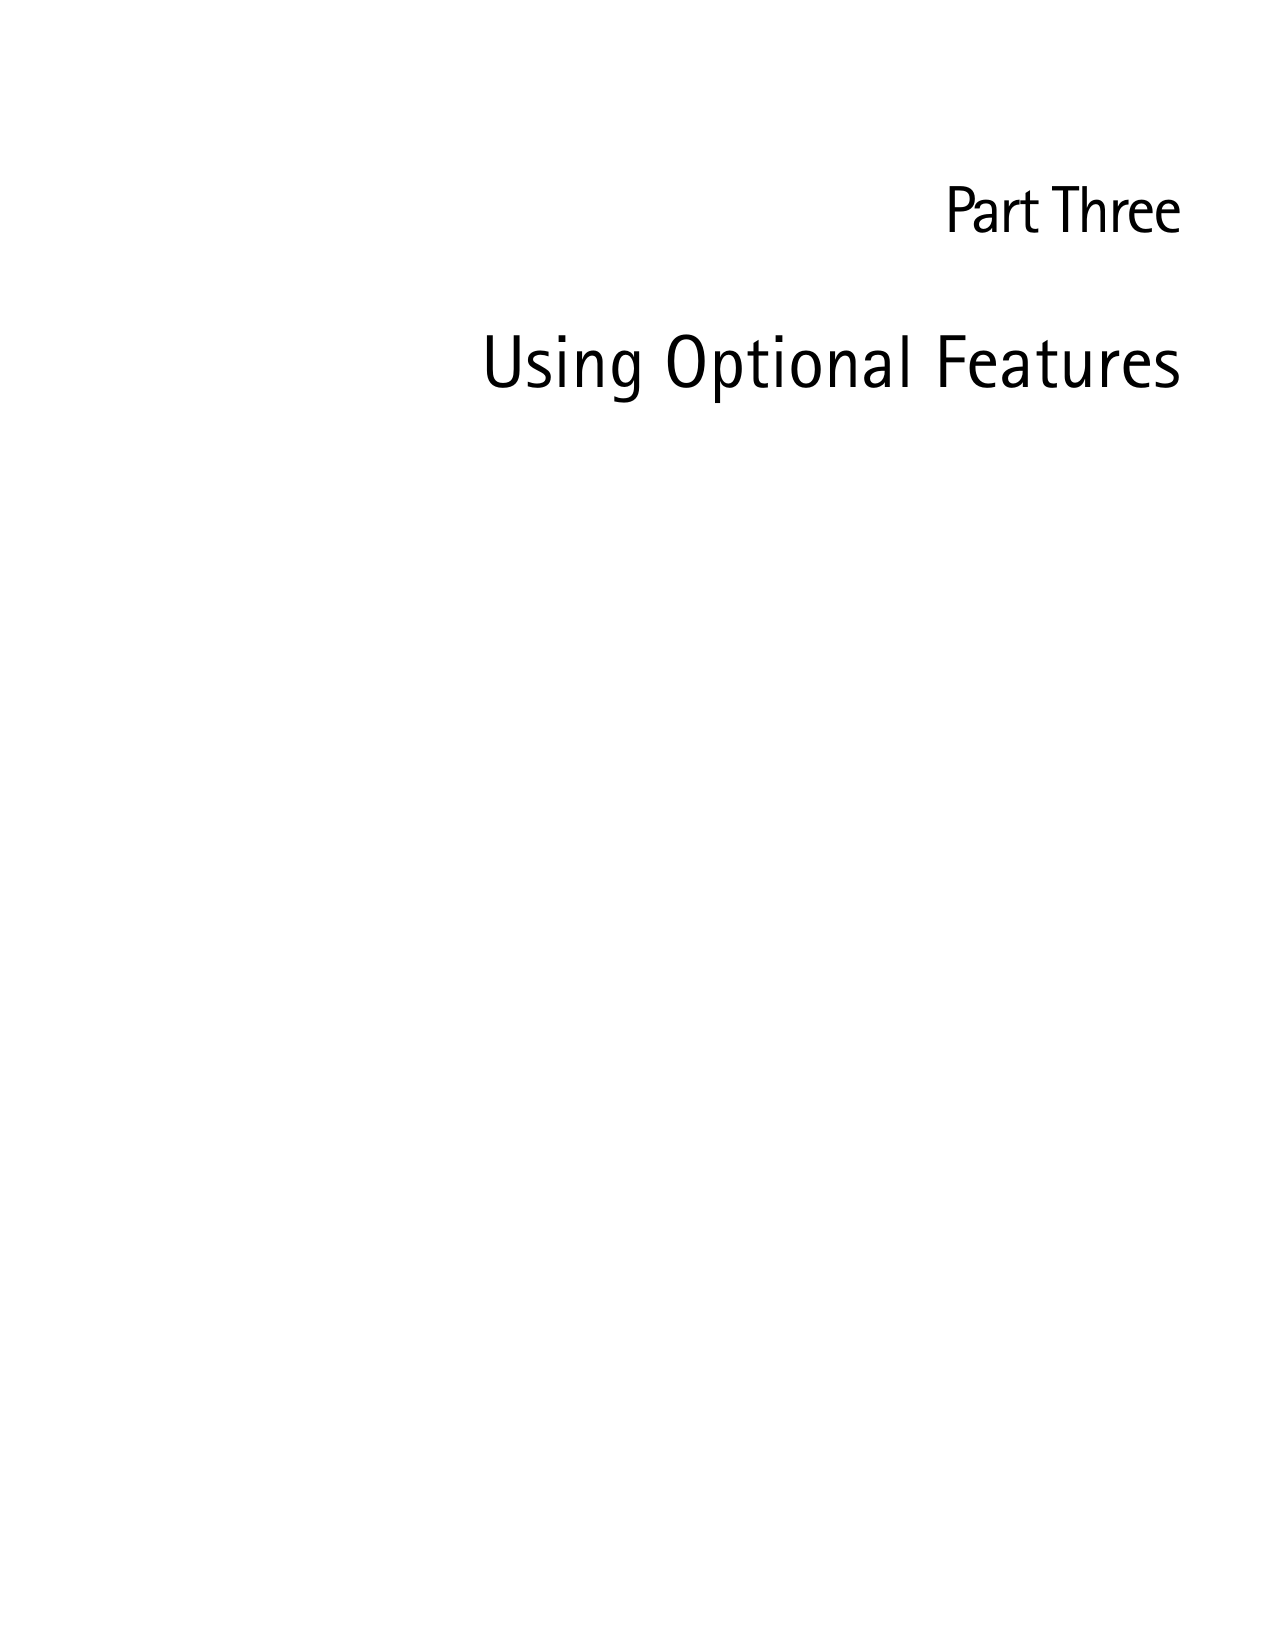 Part ThreeUsing Optional Features 